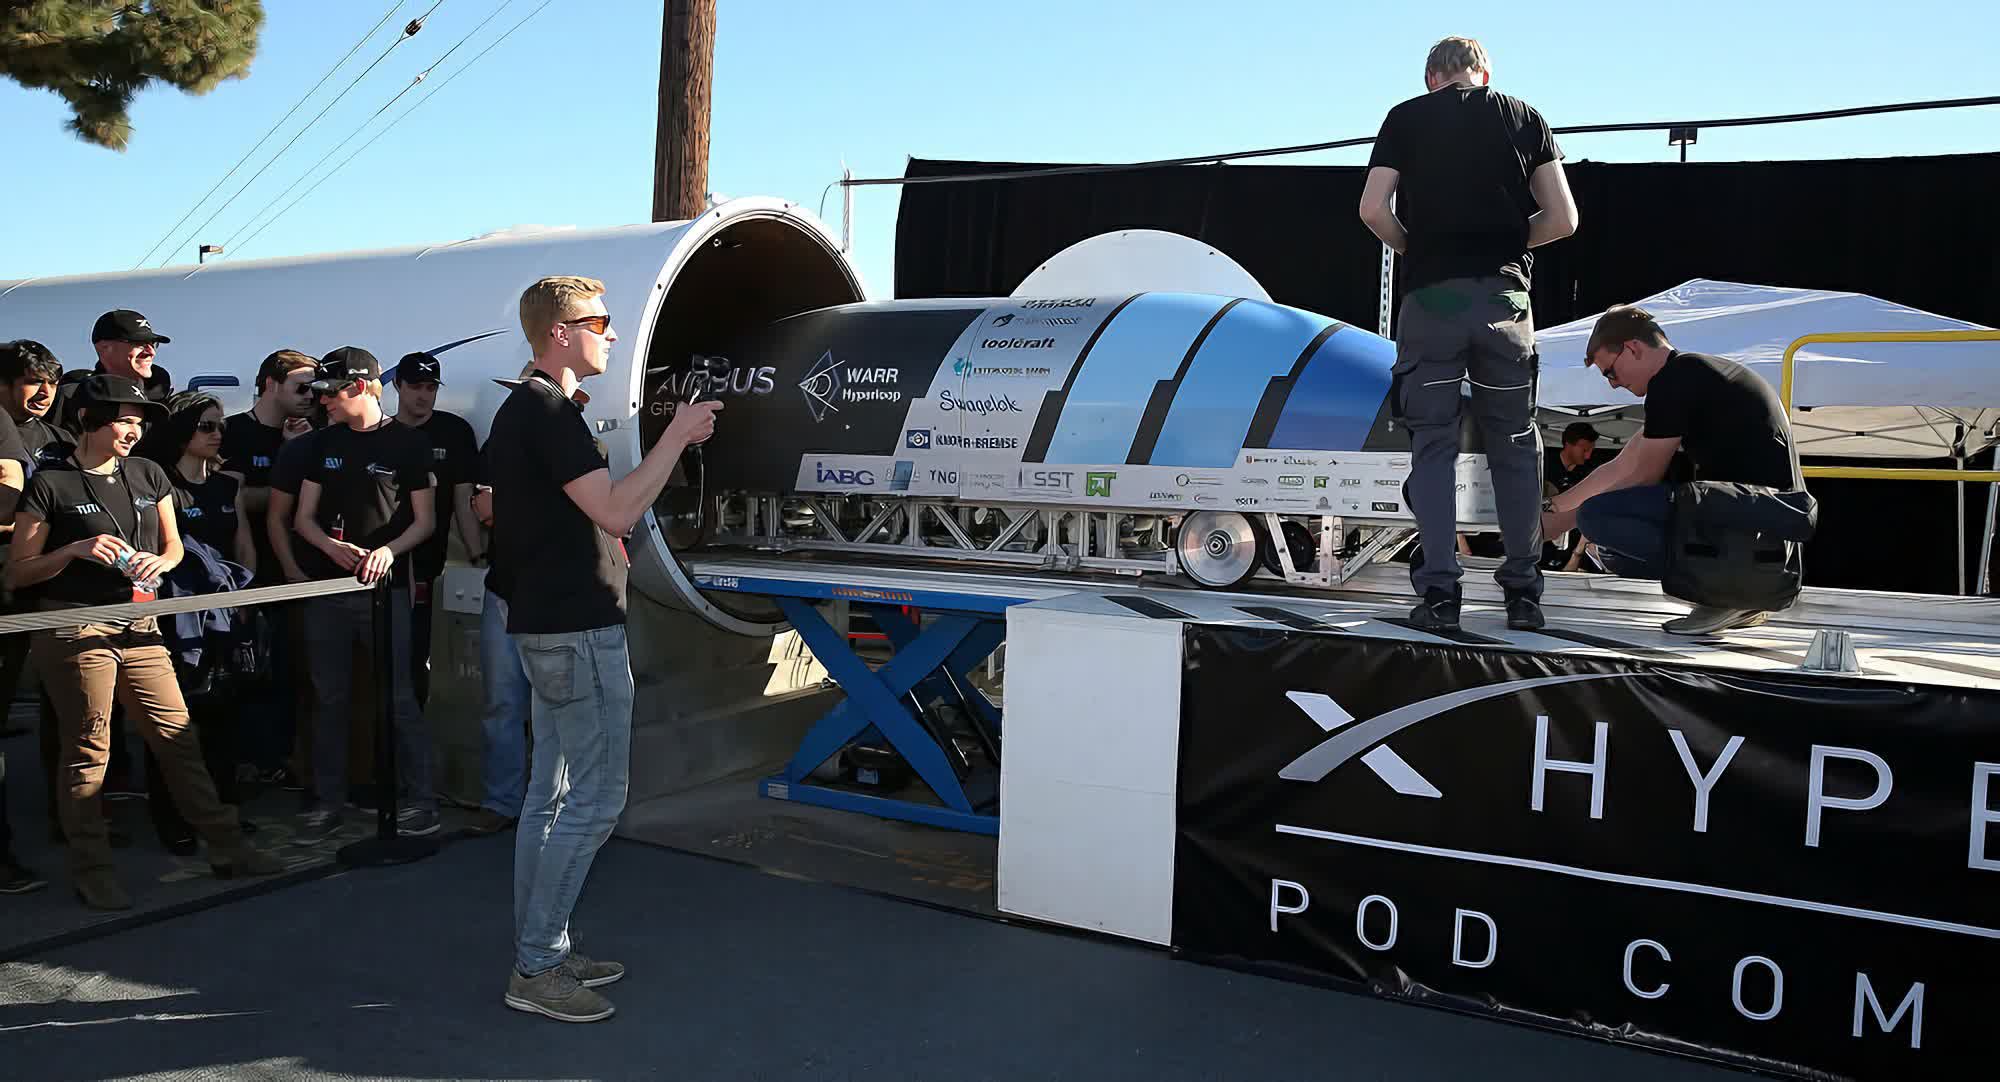 Space X Hyperloop tube dismantled for employee parking lot in LA suburb